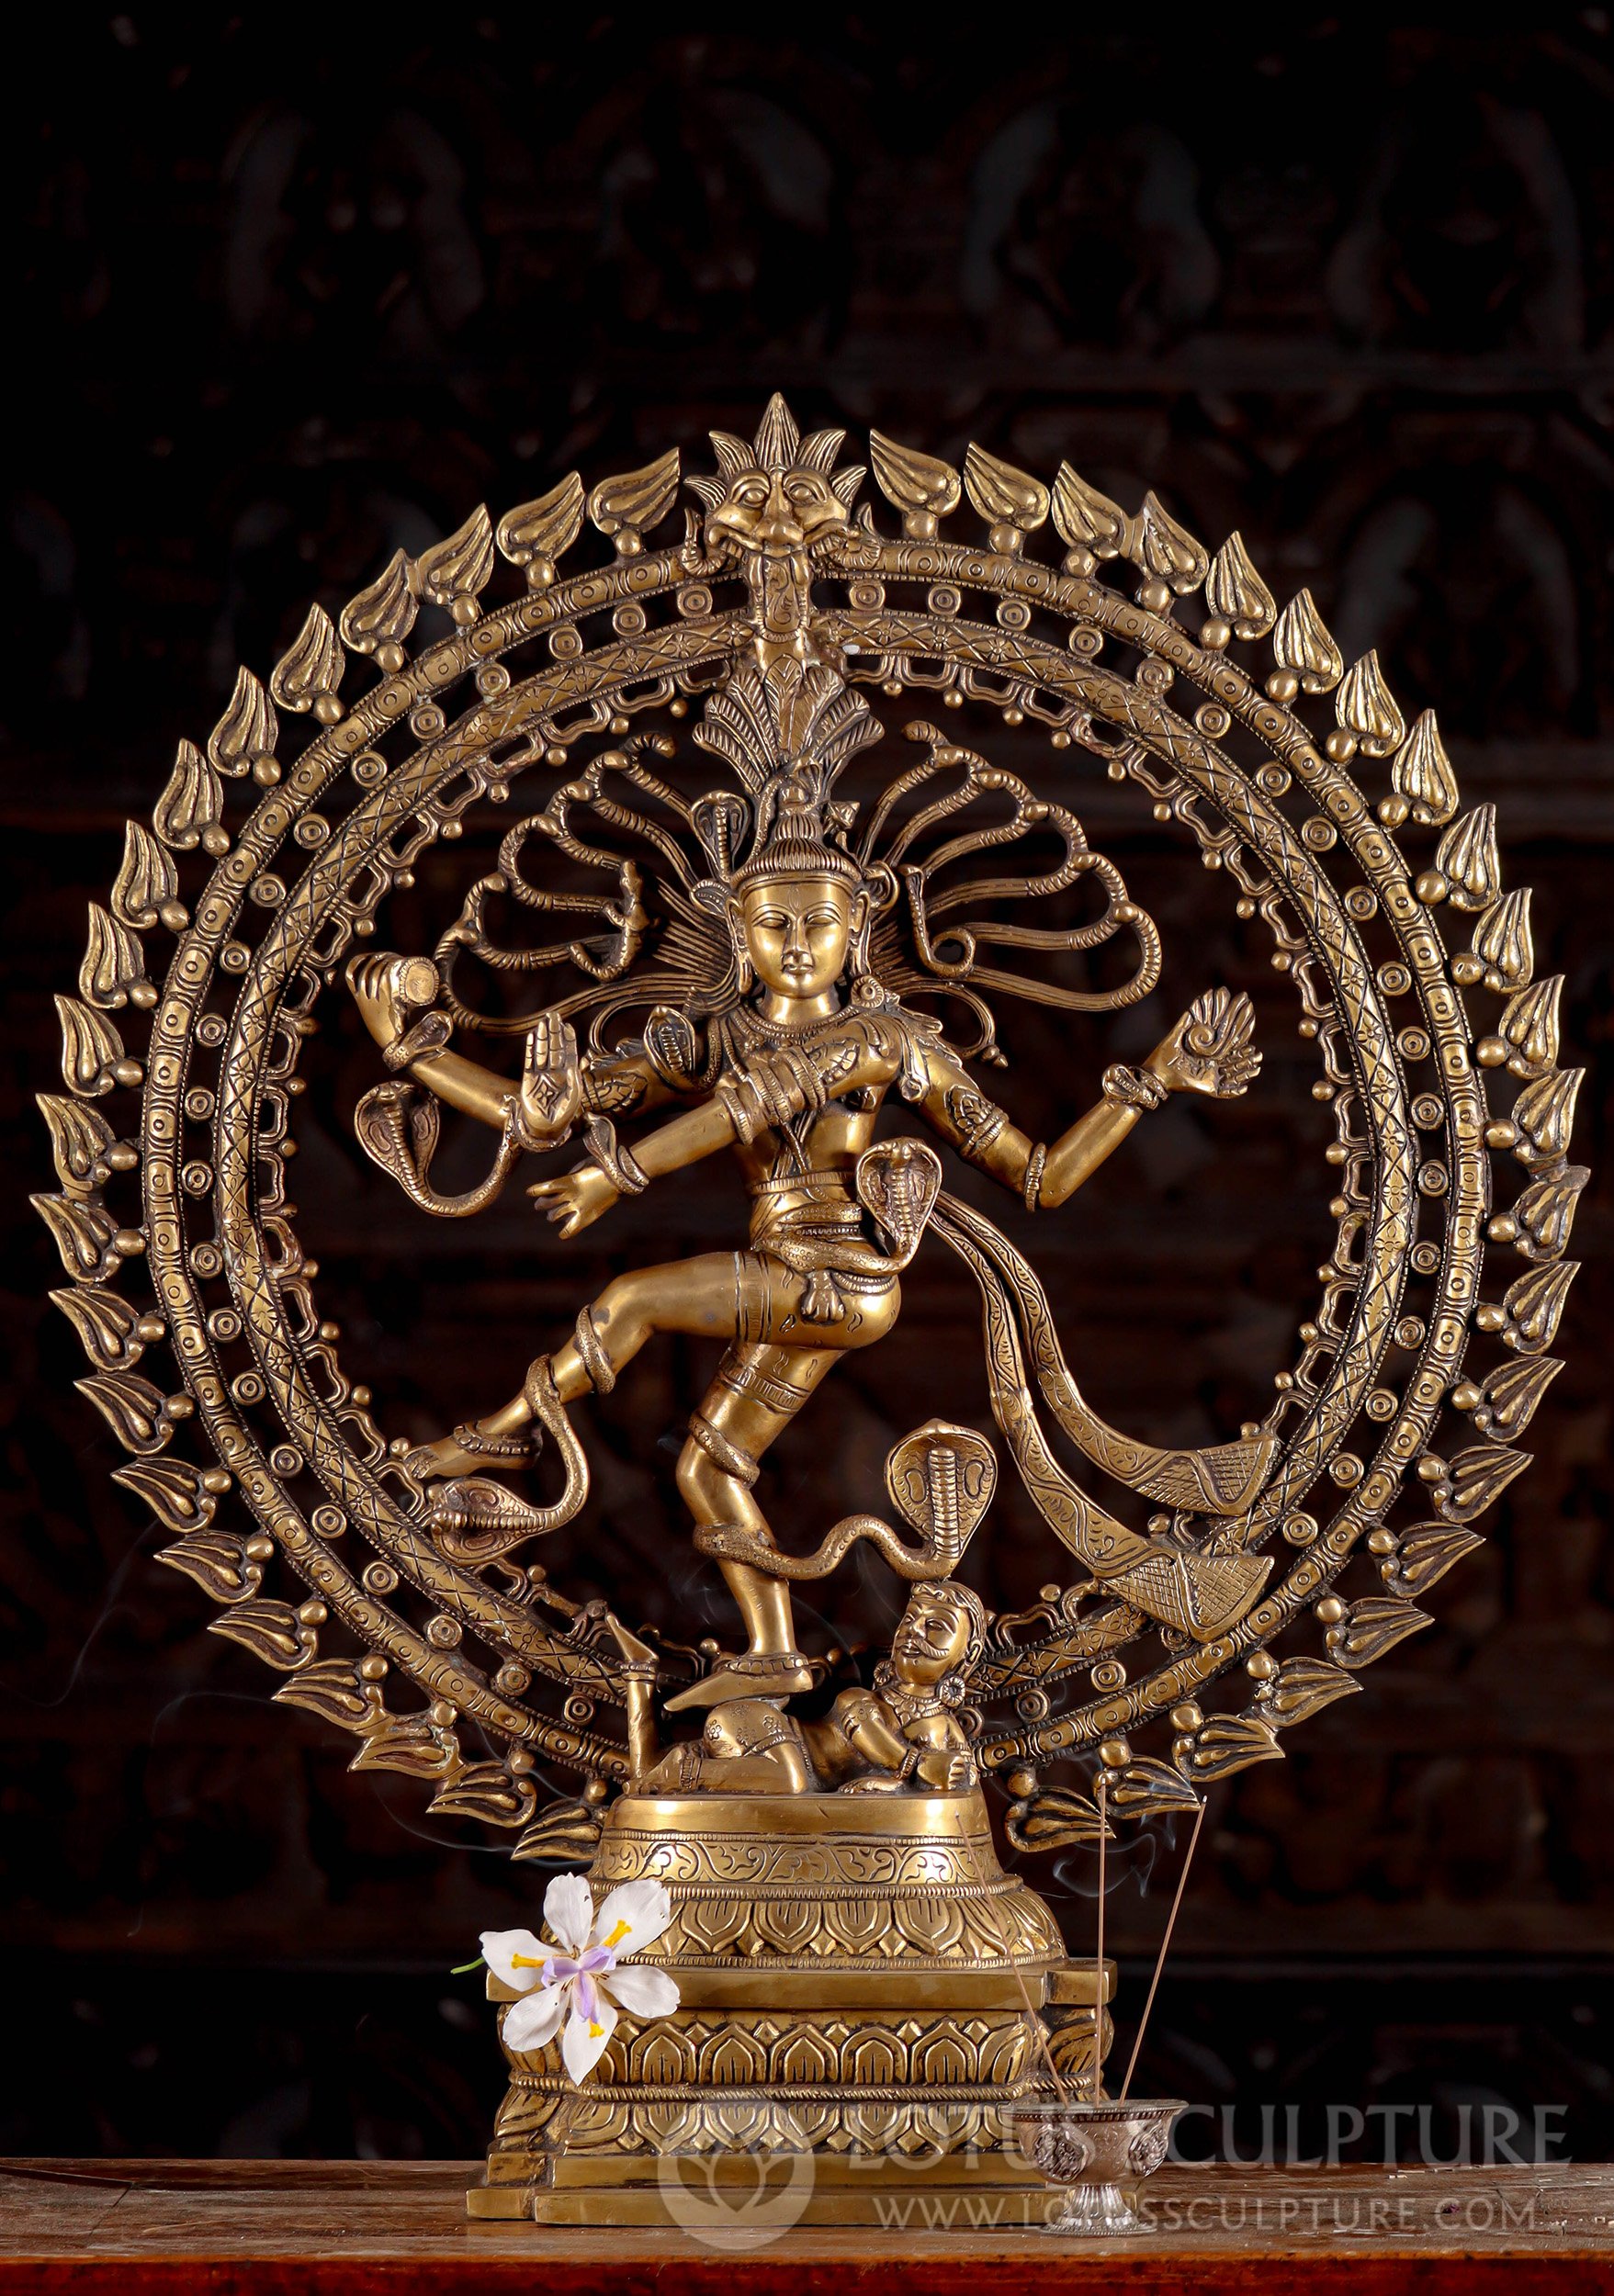 How the Nataraja made its way from India to the West